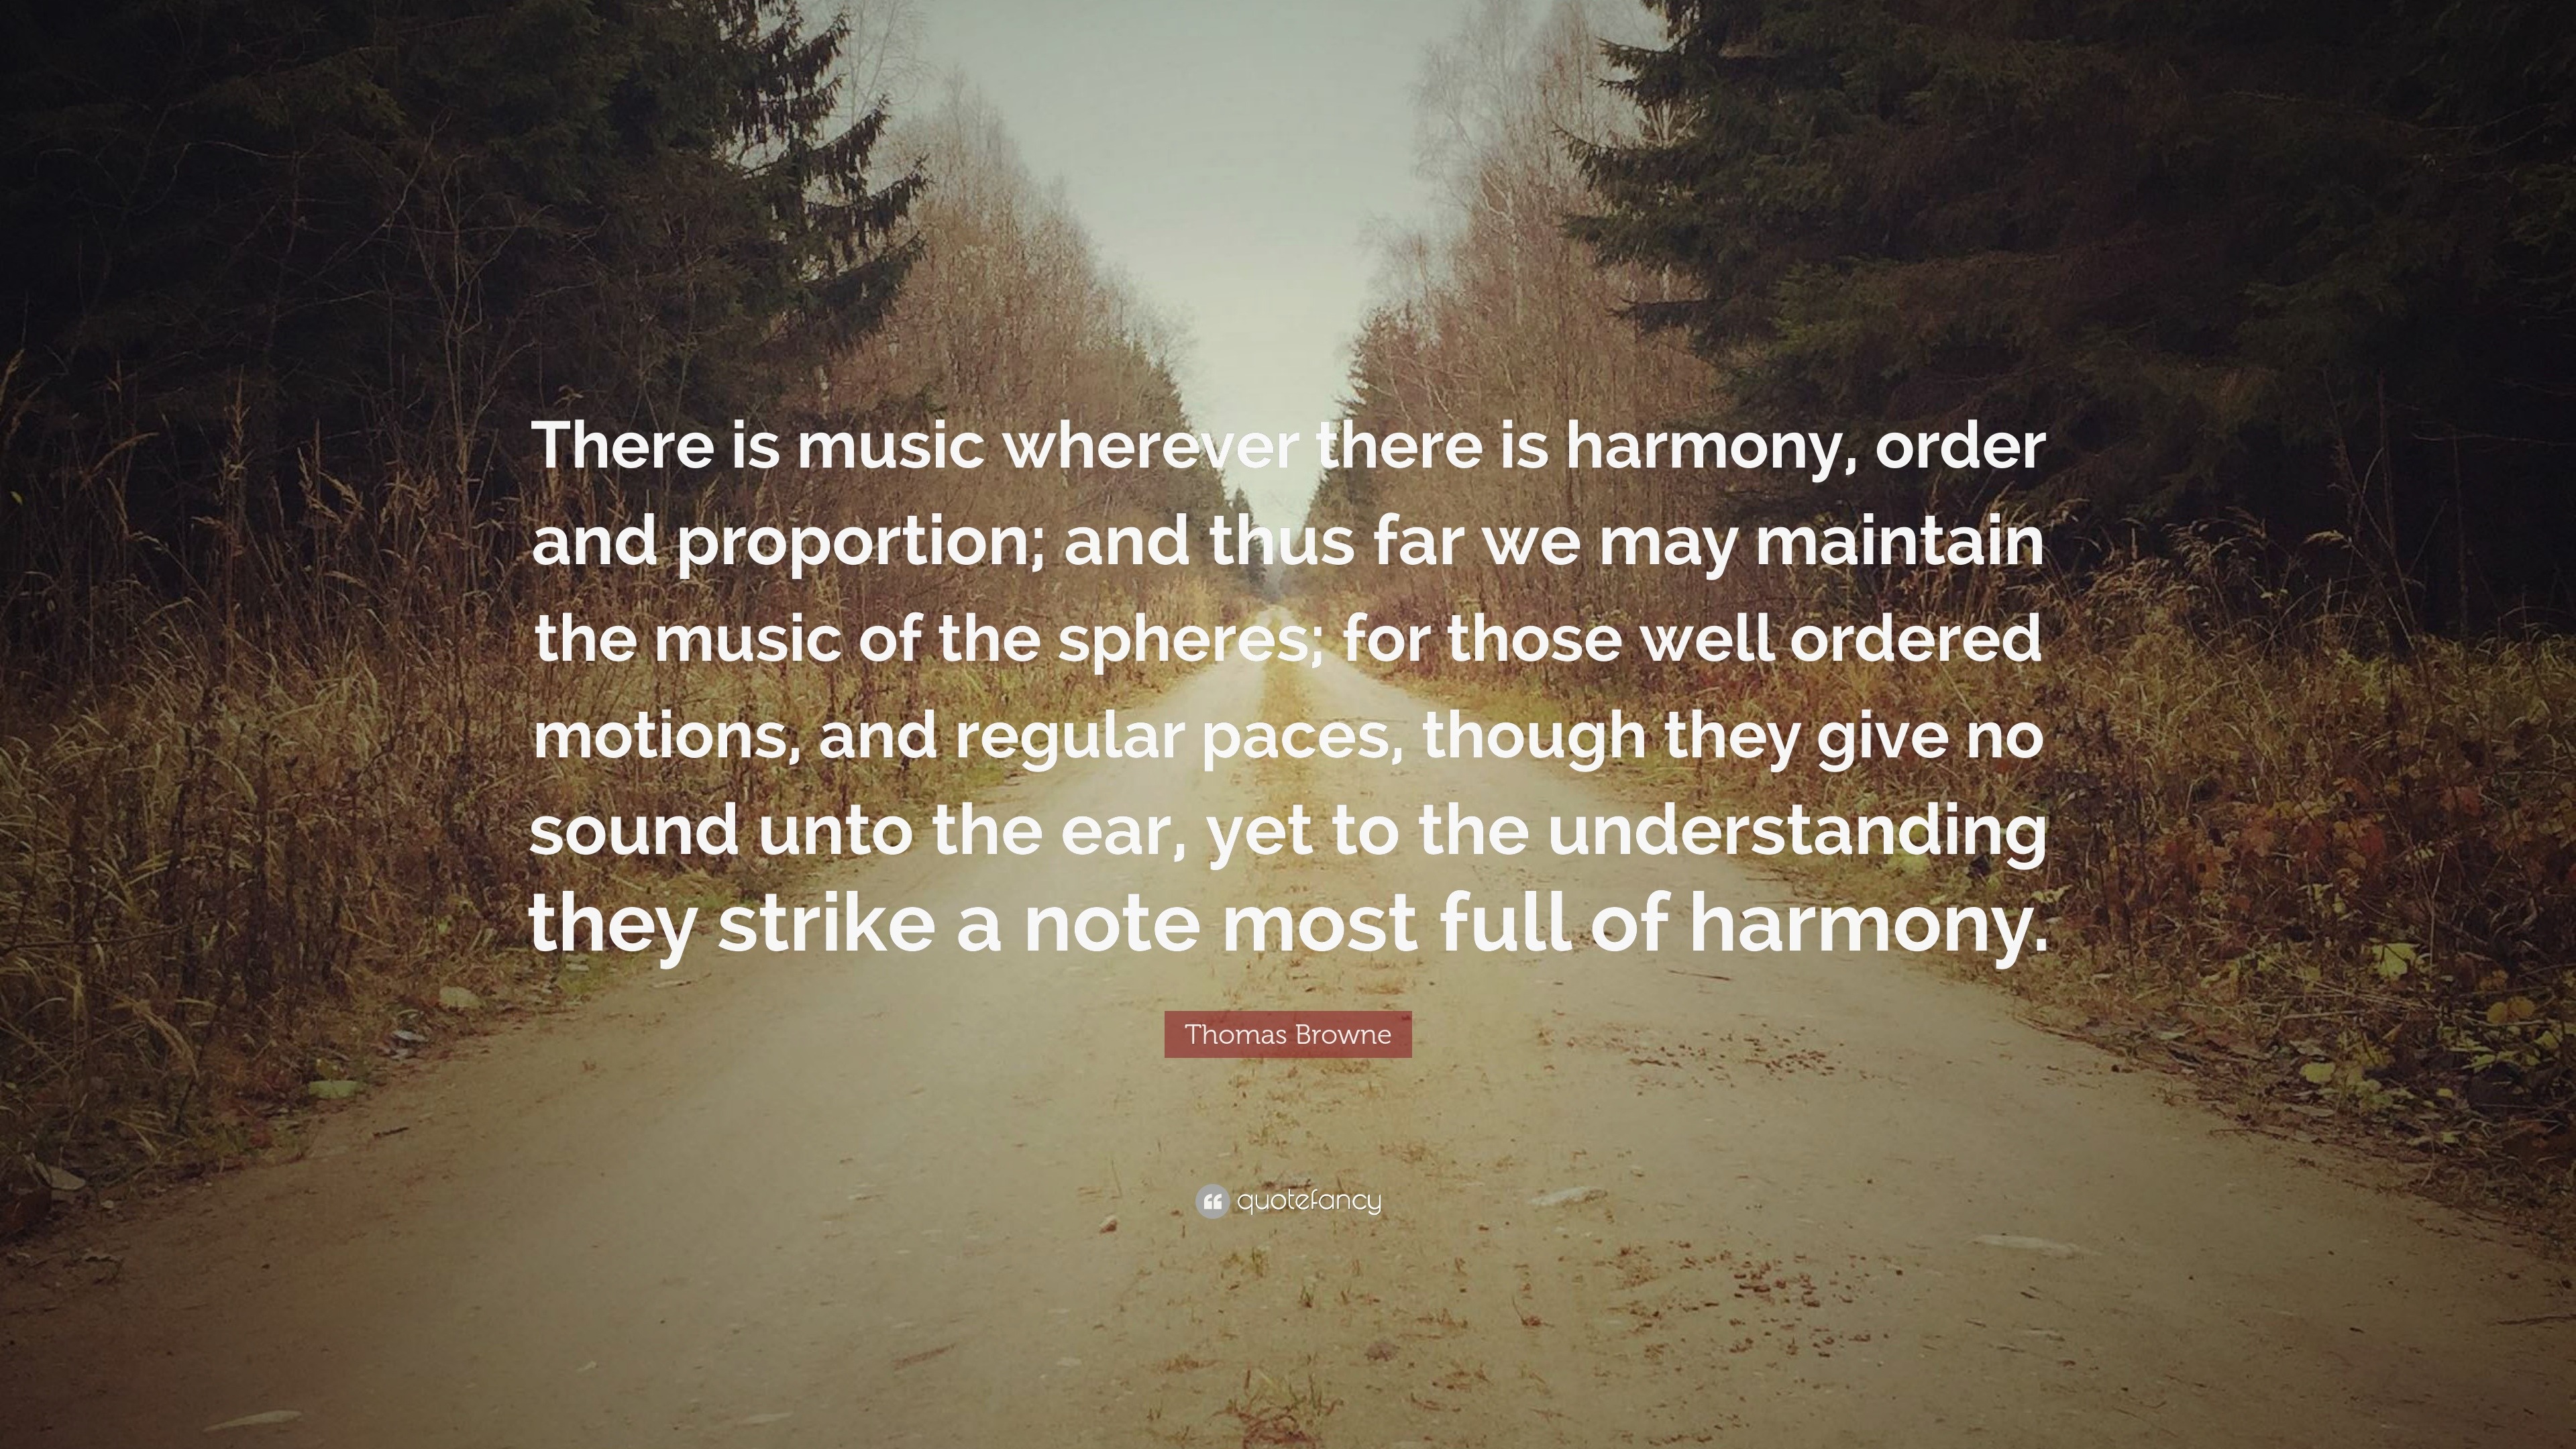 Thomas Browne Quote: “There is music wherever there is harmony, order